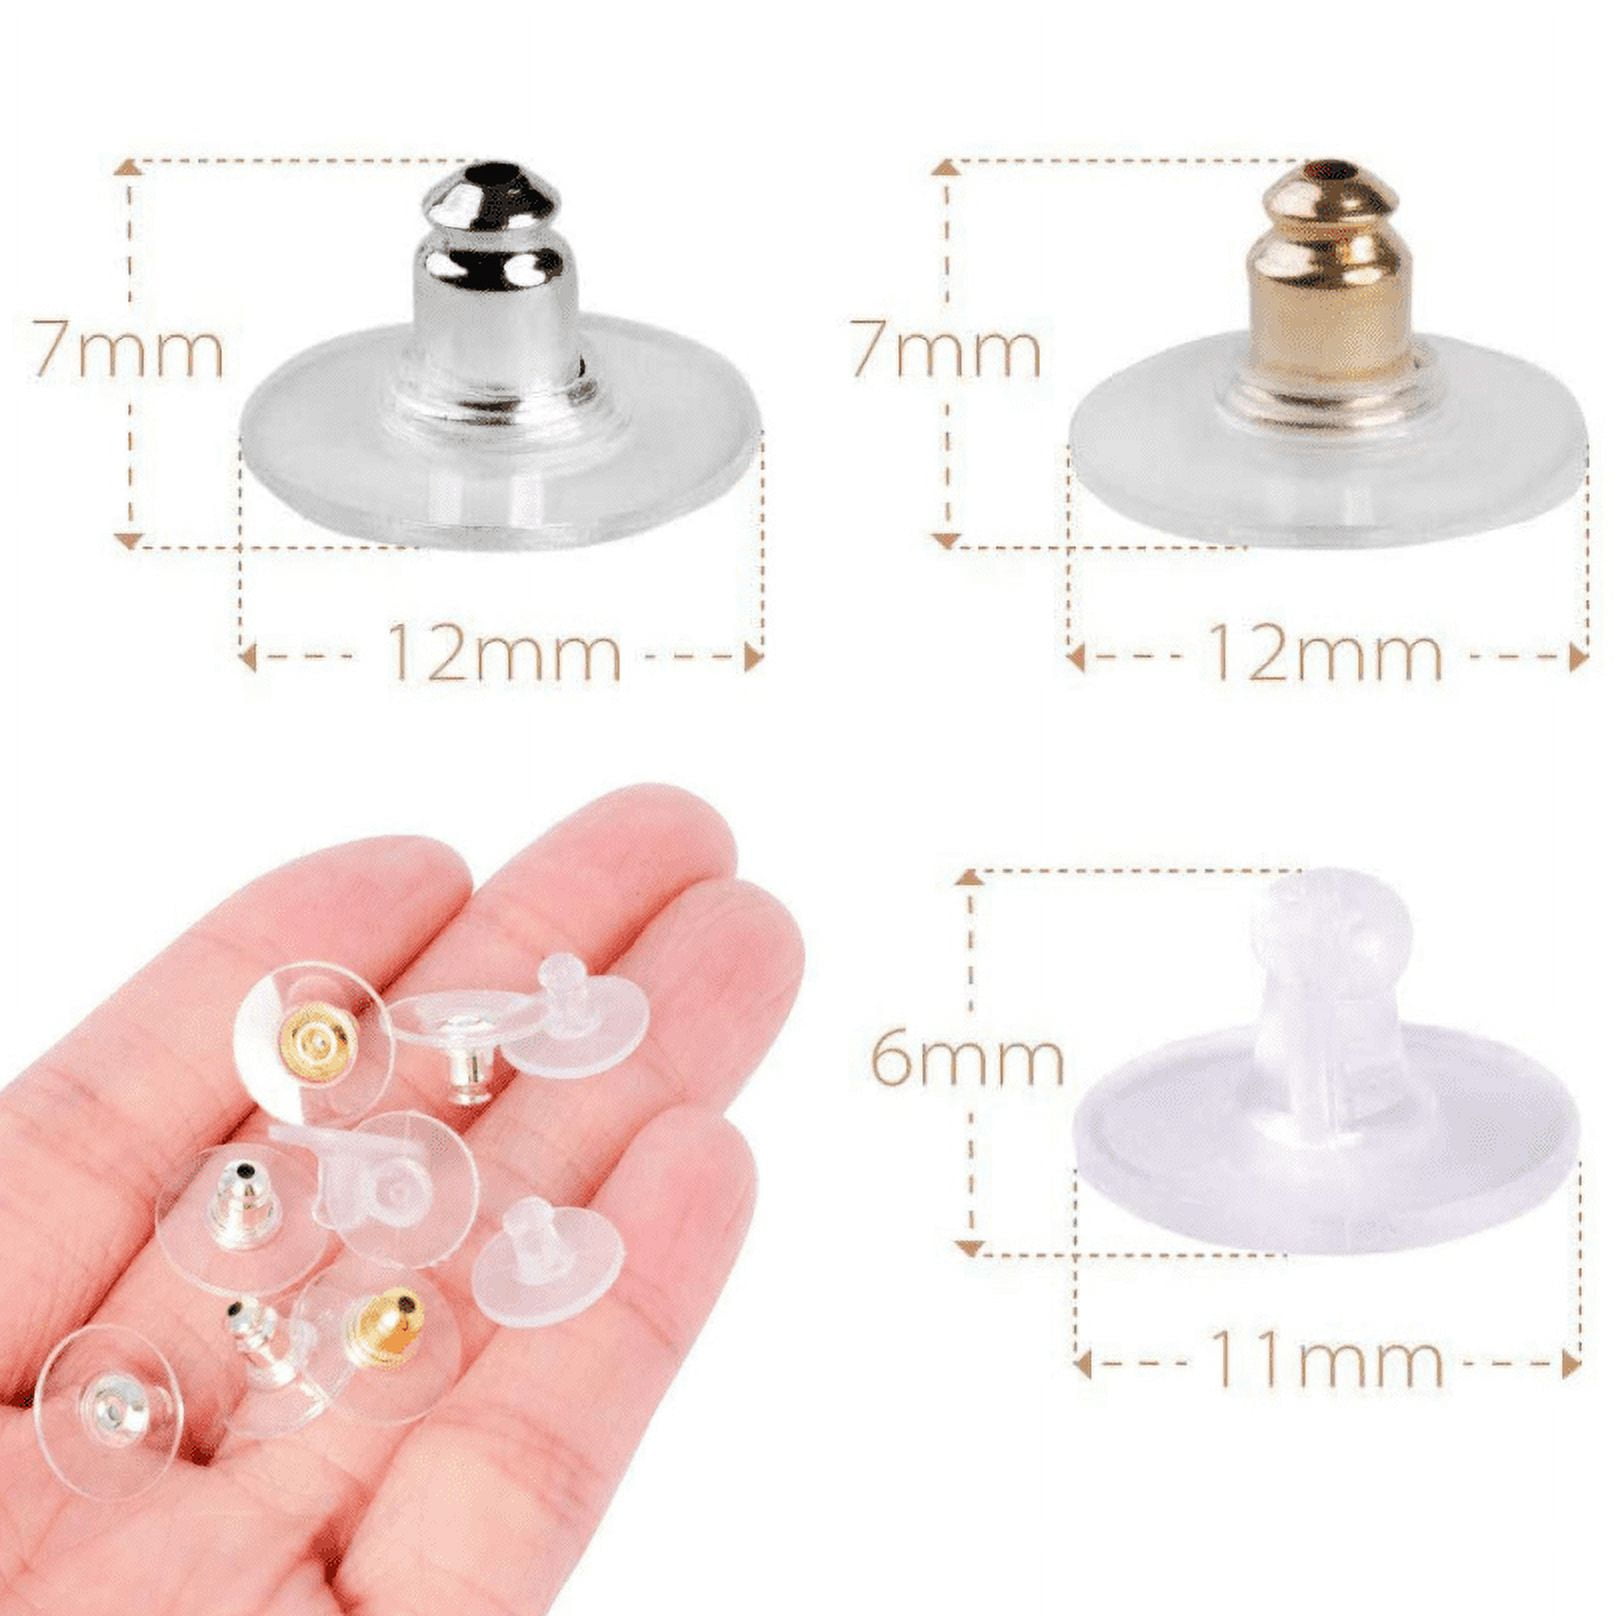 Diamond Stud Earrings, Super-Comfort 14K Yellow Gold Silicone  Hypoallergenic Earring Clutches